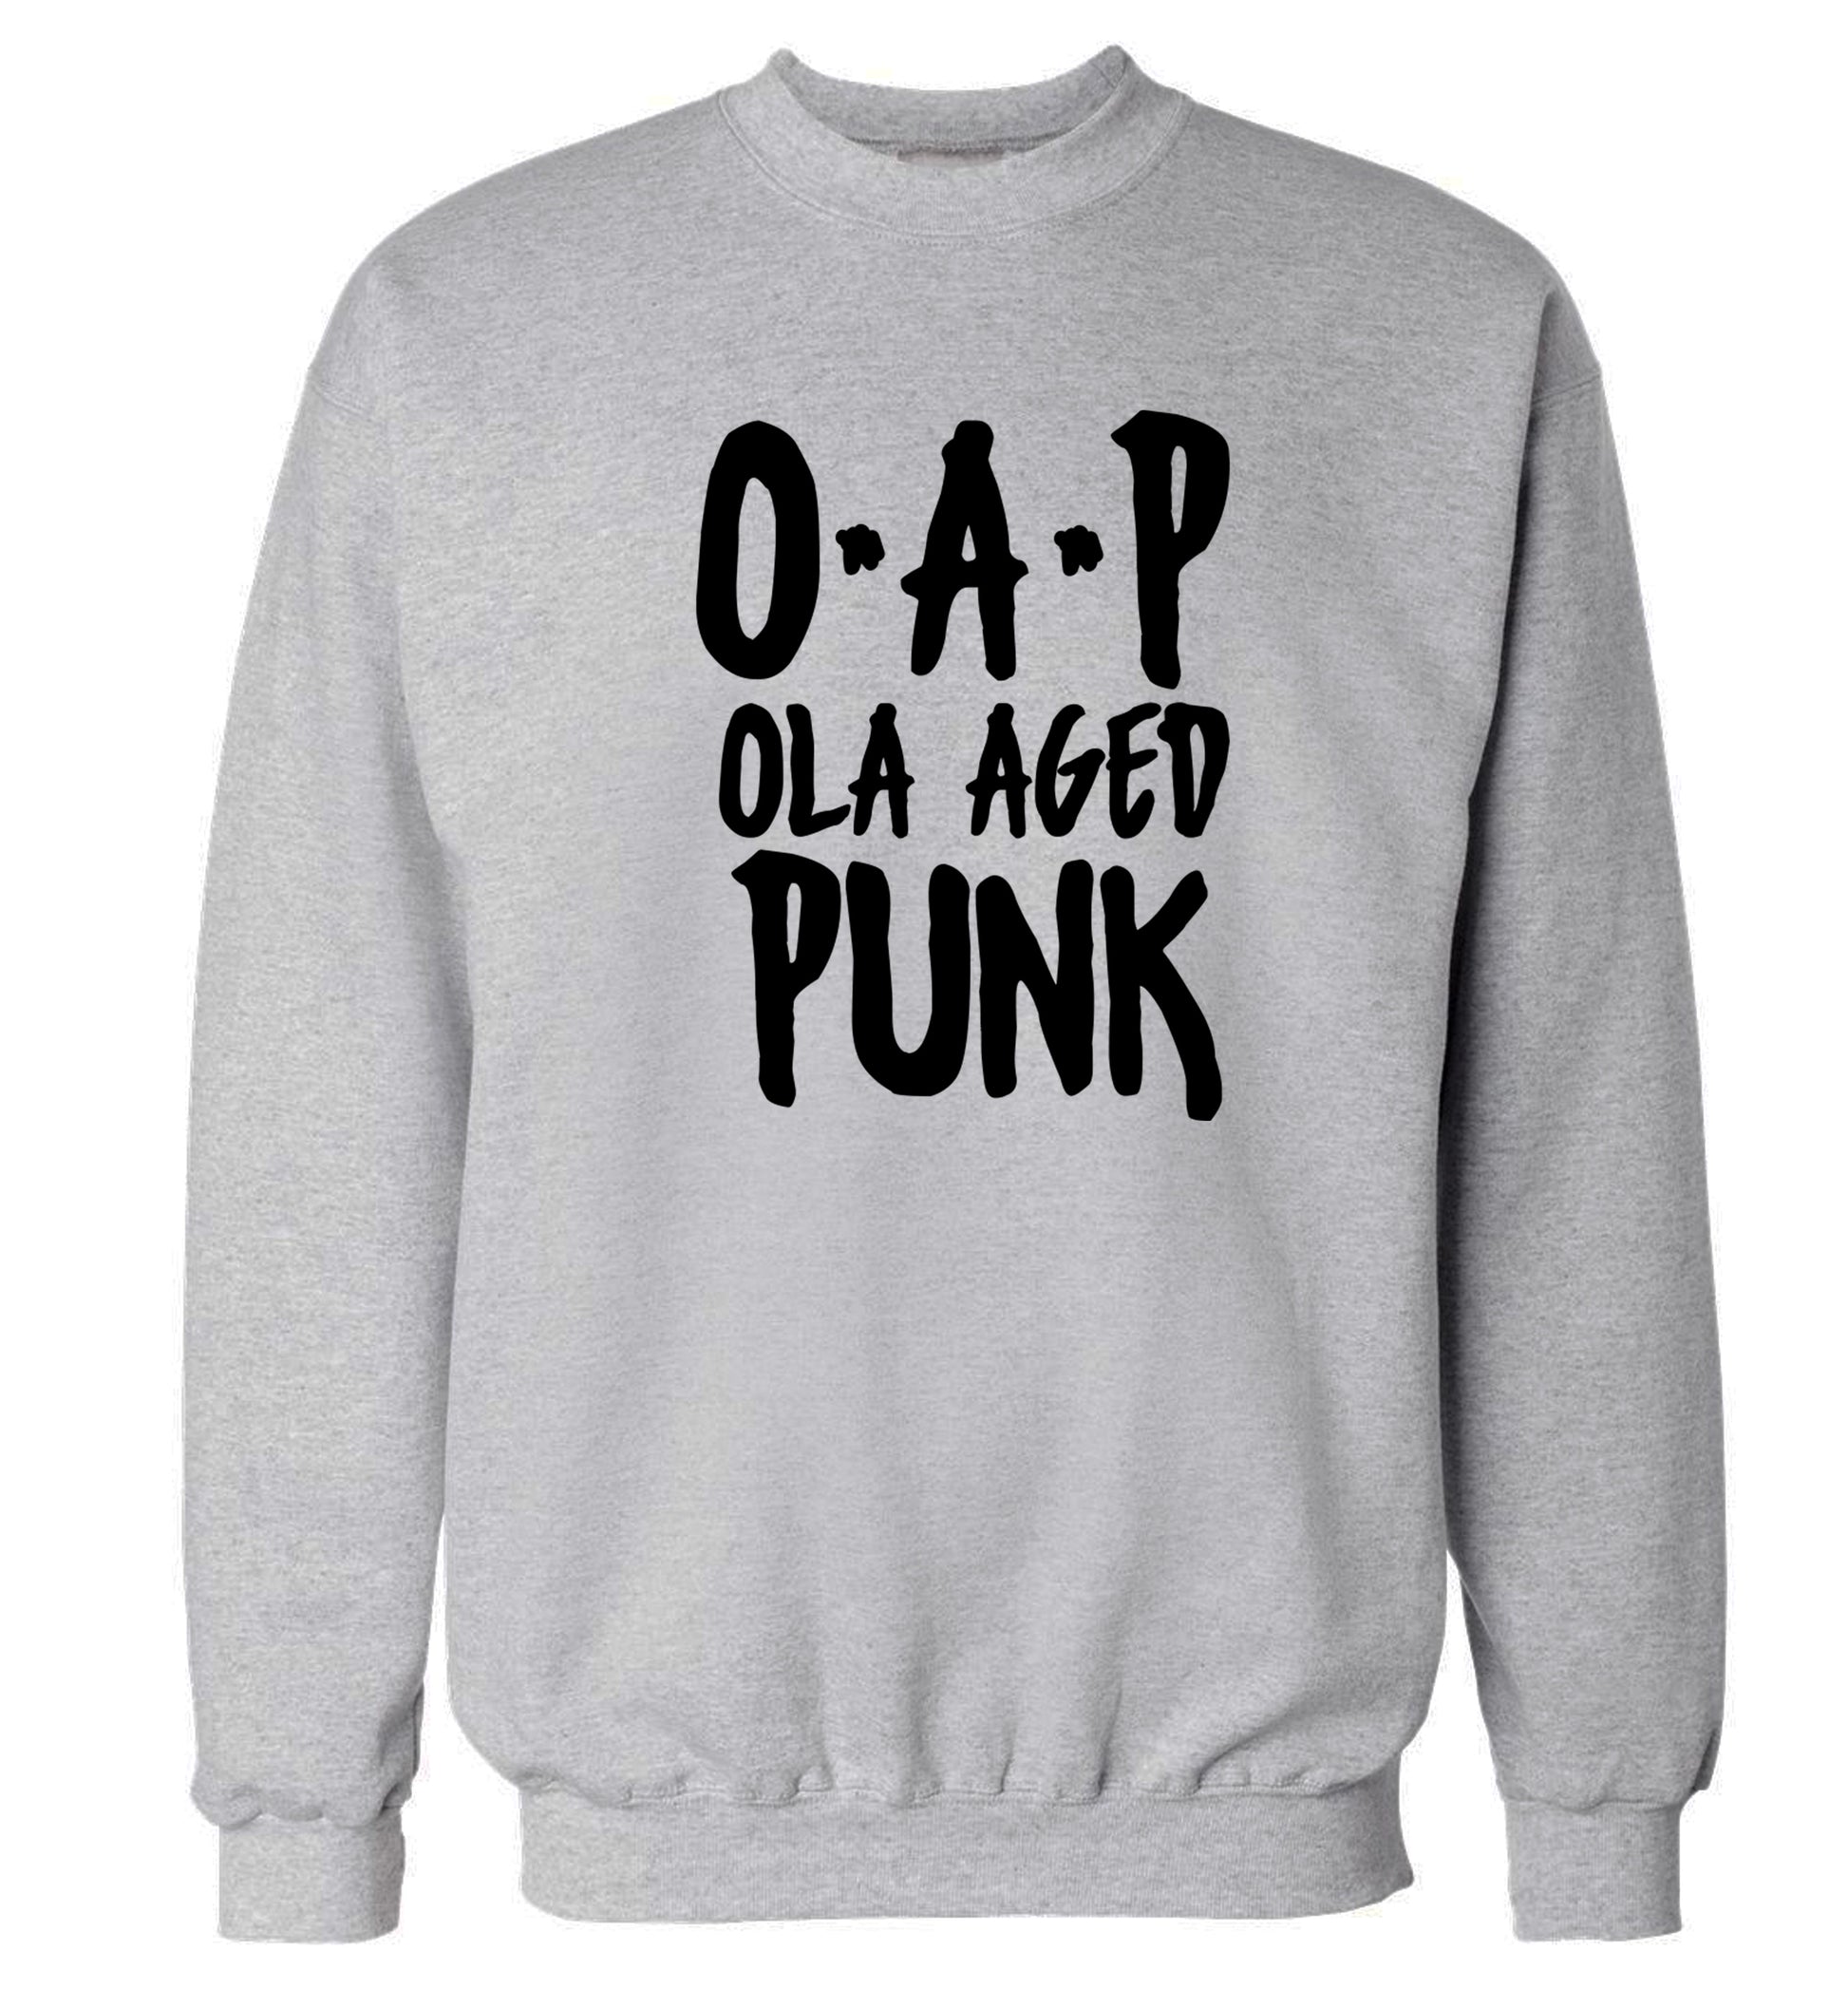 O.A.P Old Aged Punk Adult's unisex grey Sweater 2XL